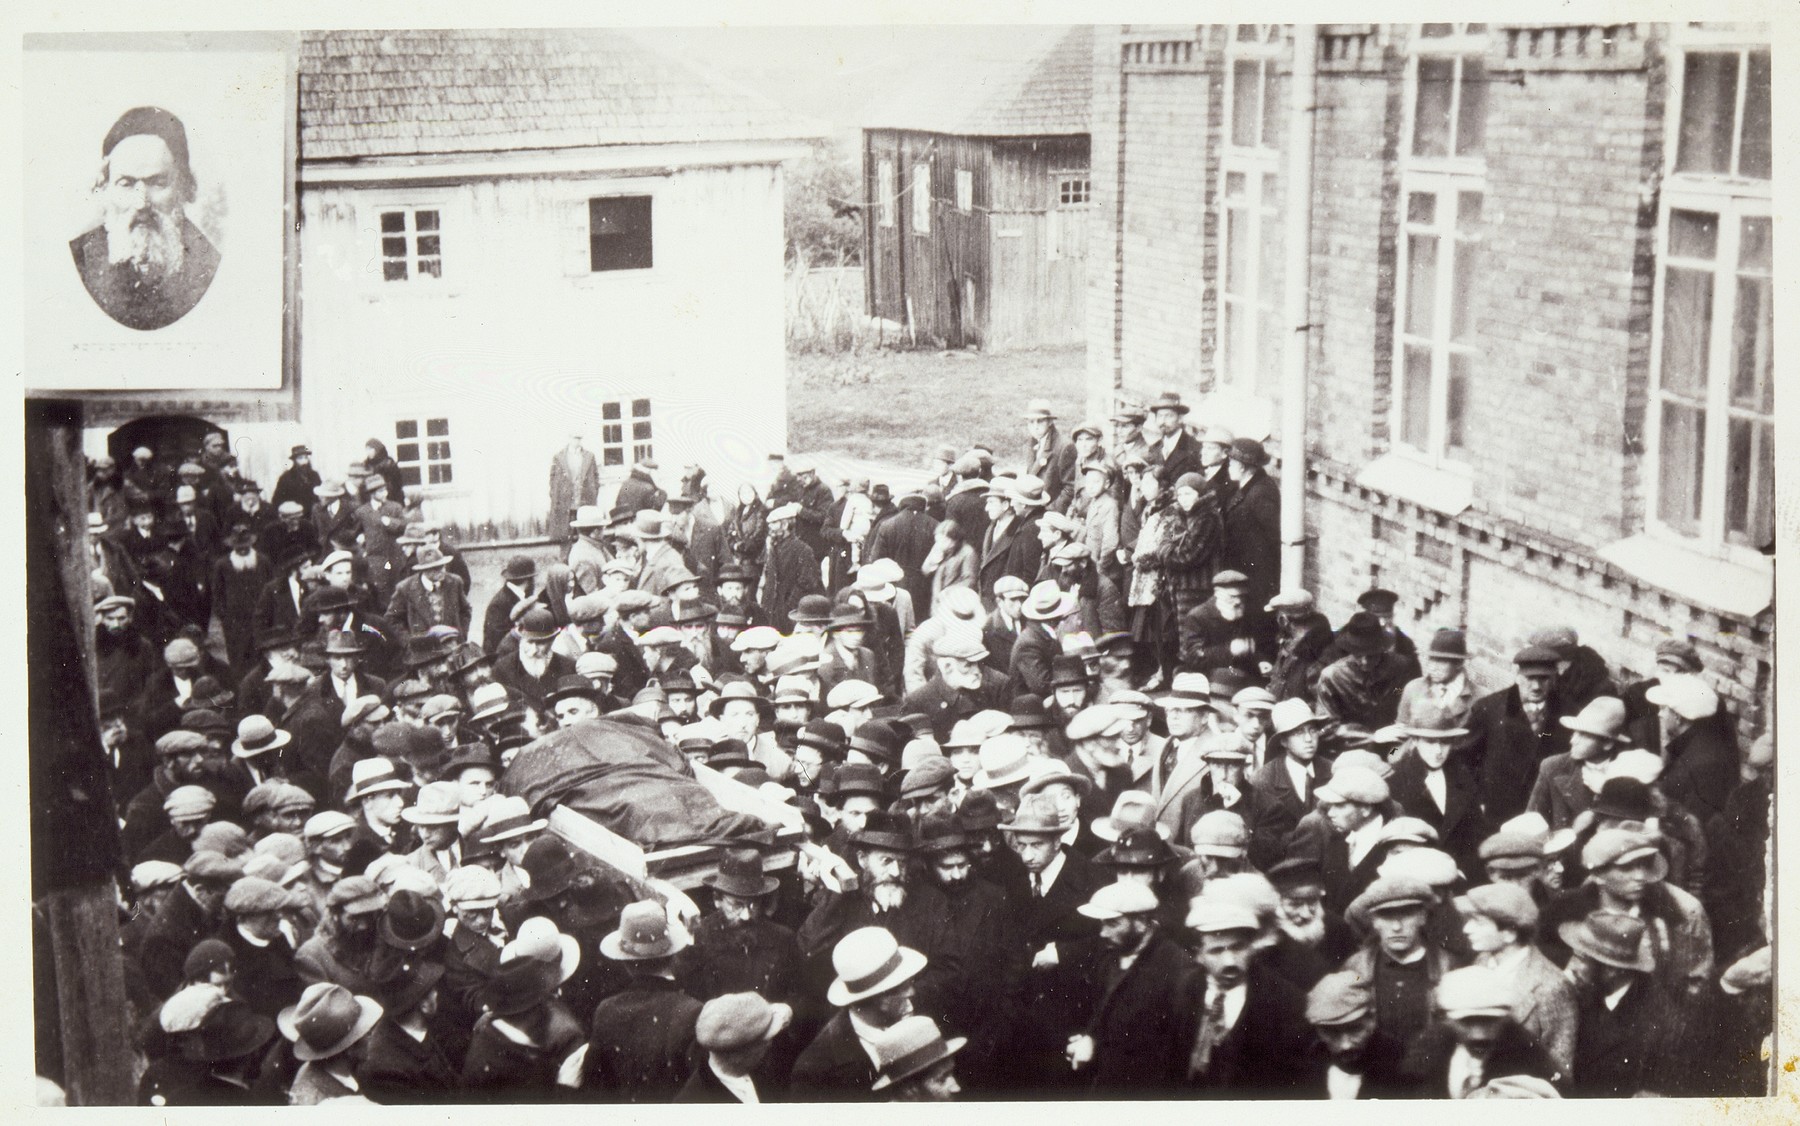 A large crowd of disciples gathers at the Radun Yeshiva to escort the body of the Hafetz Hayyim during his funeral.